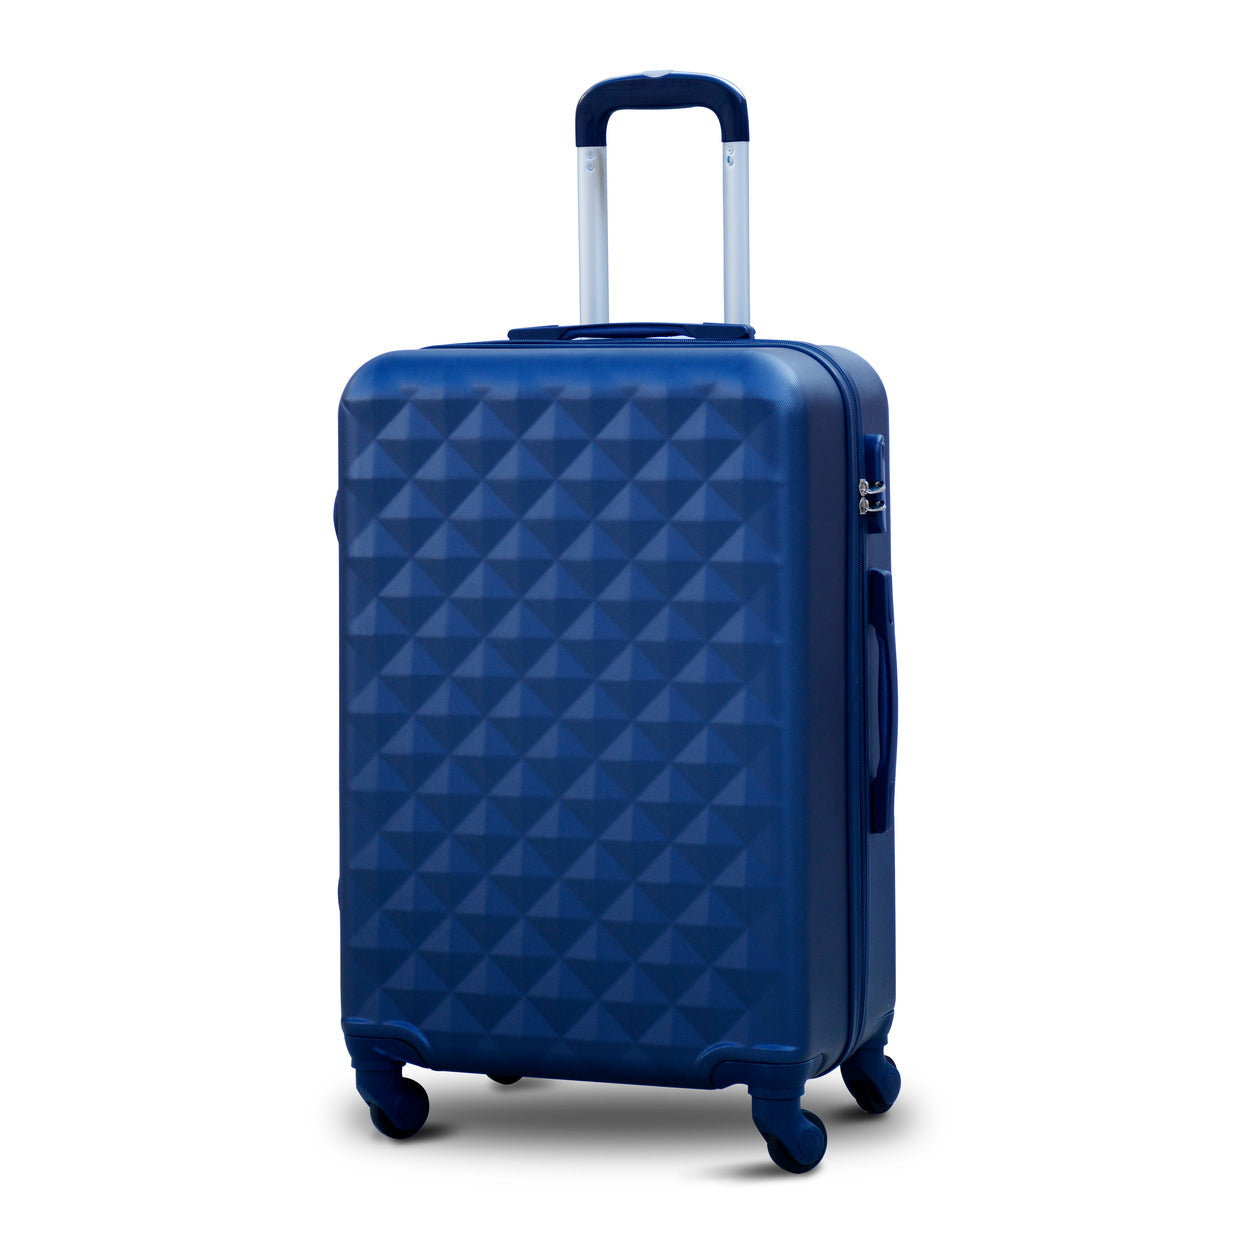 20" Blue Colour Diamond Cut ABS Luggage Lightweight Hard Case Carry On Spinner Wheel Baggage